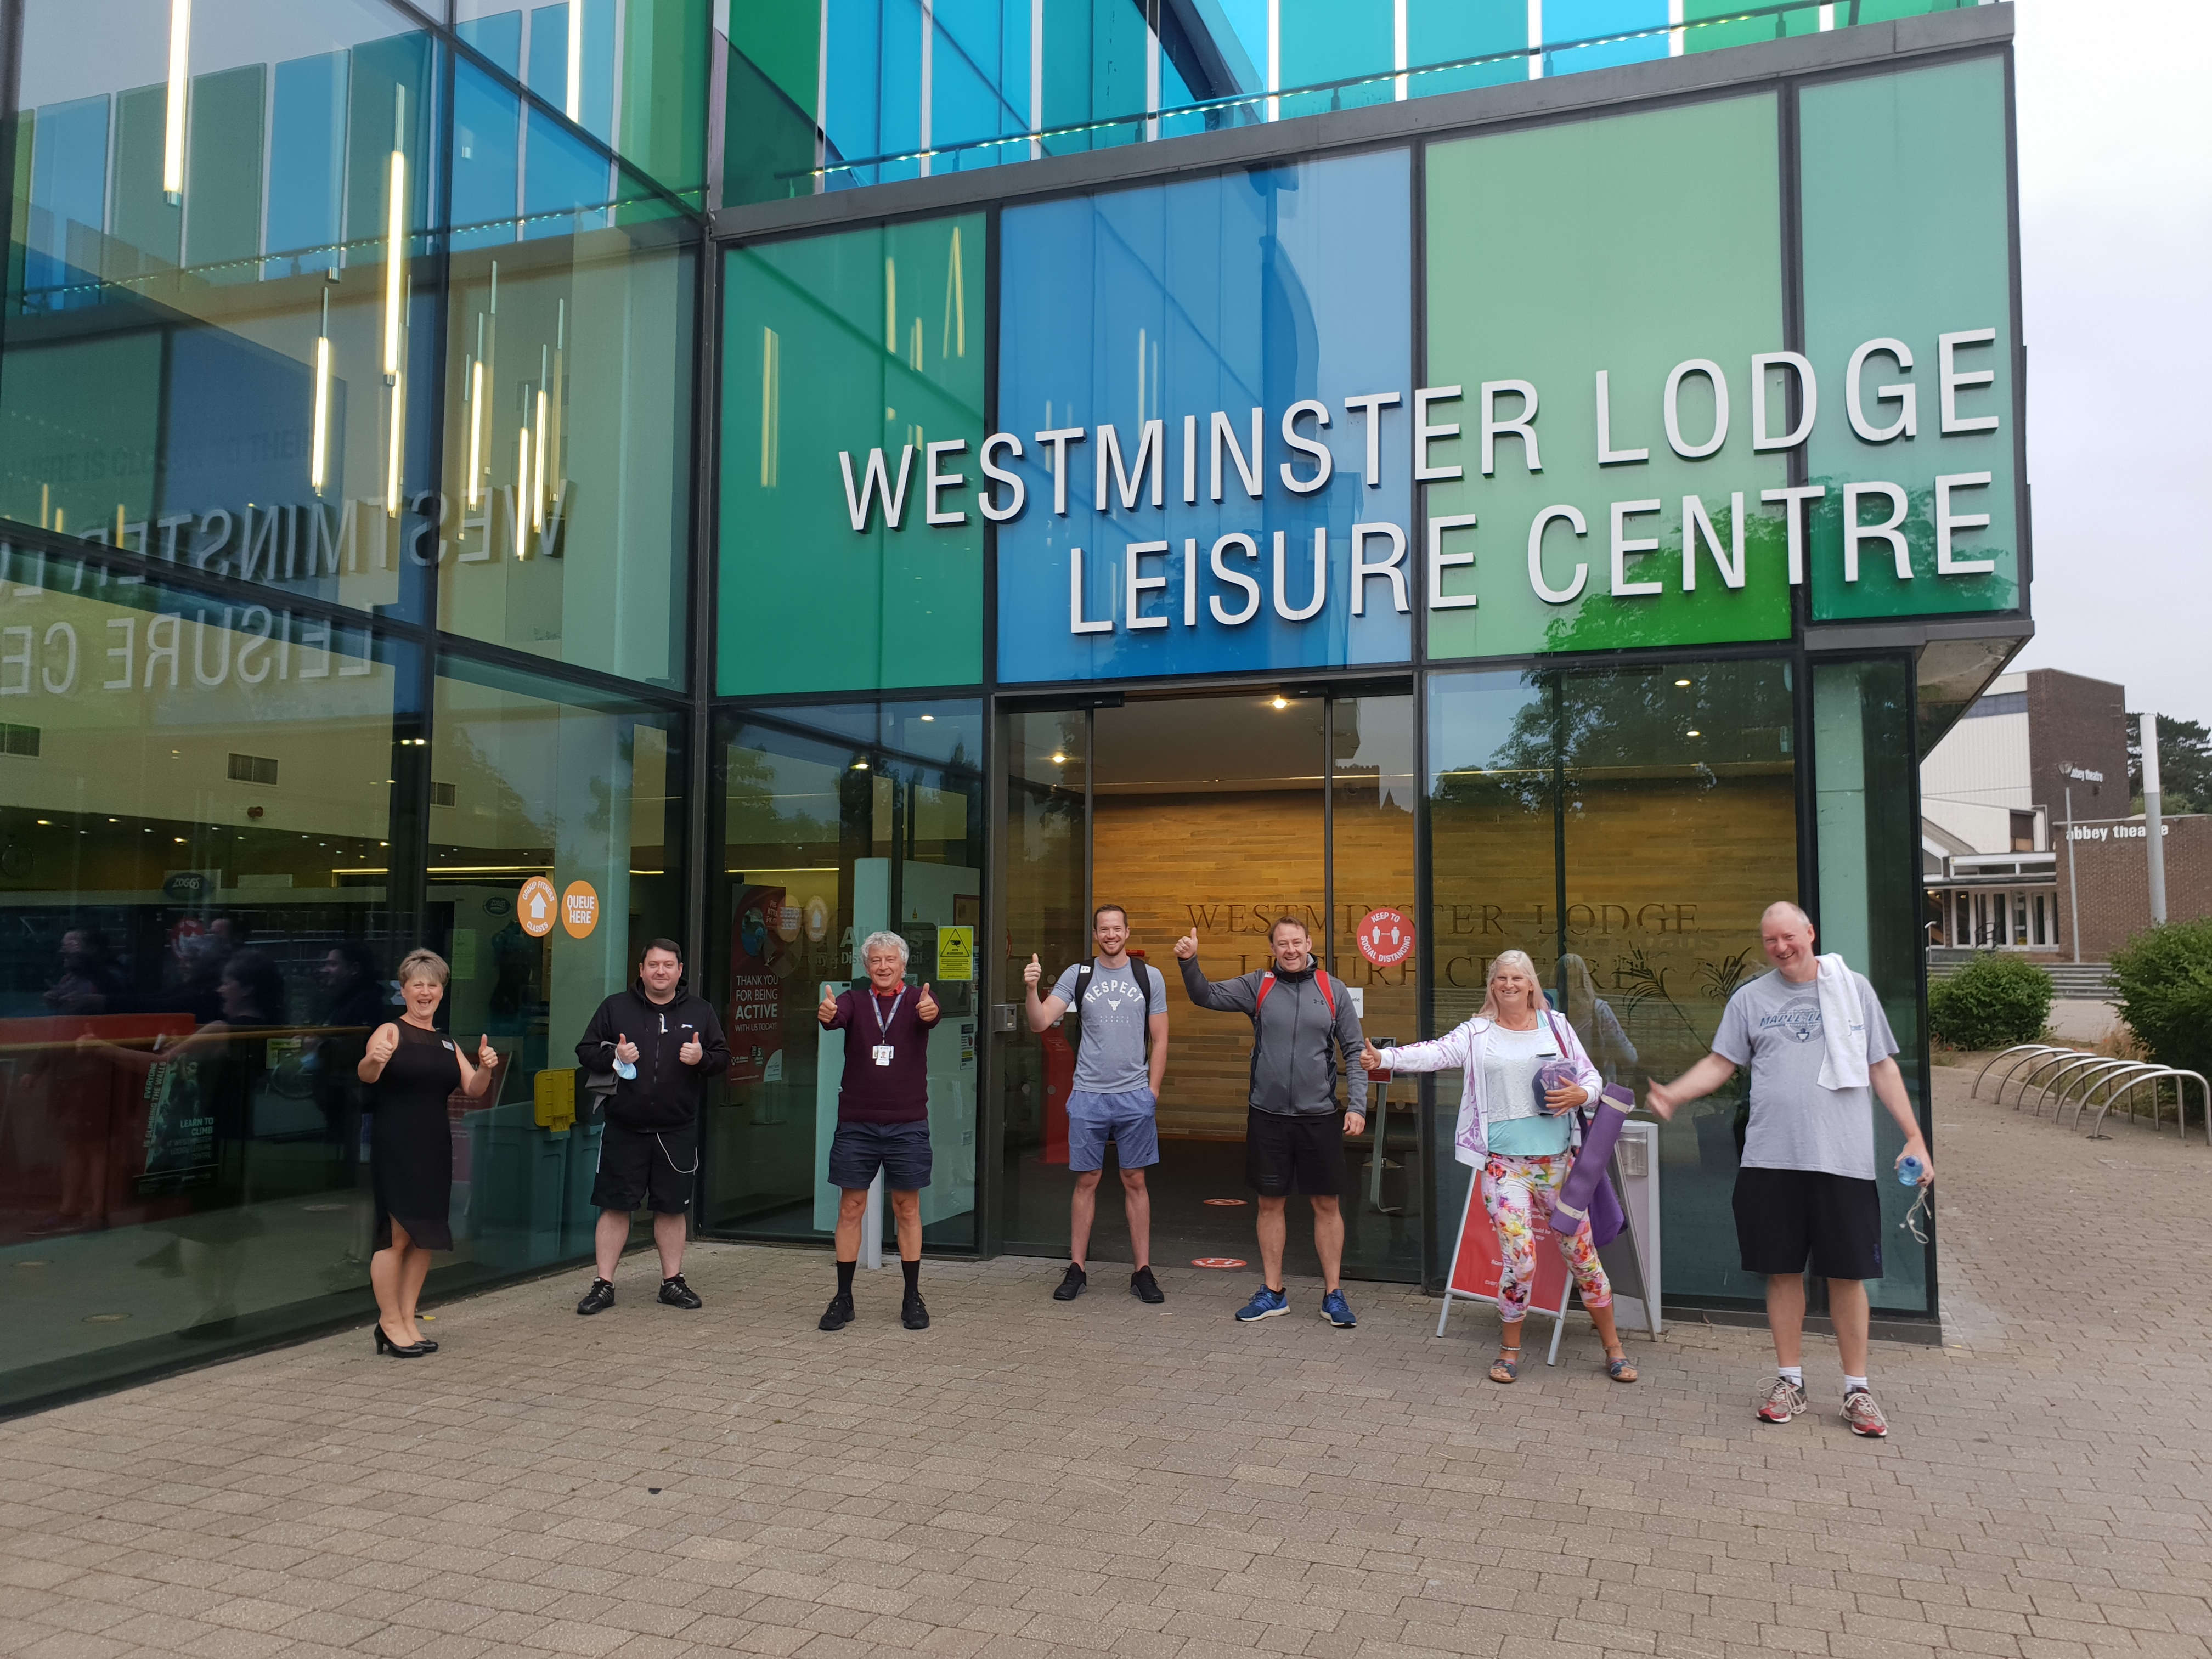 Westminster Lodge opens its doors again after the Covid19 lockdown.